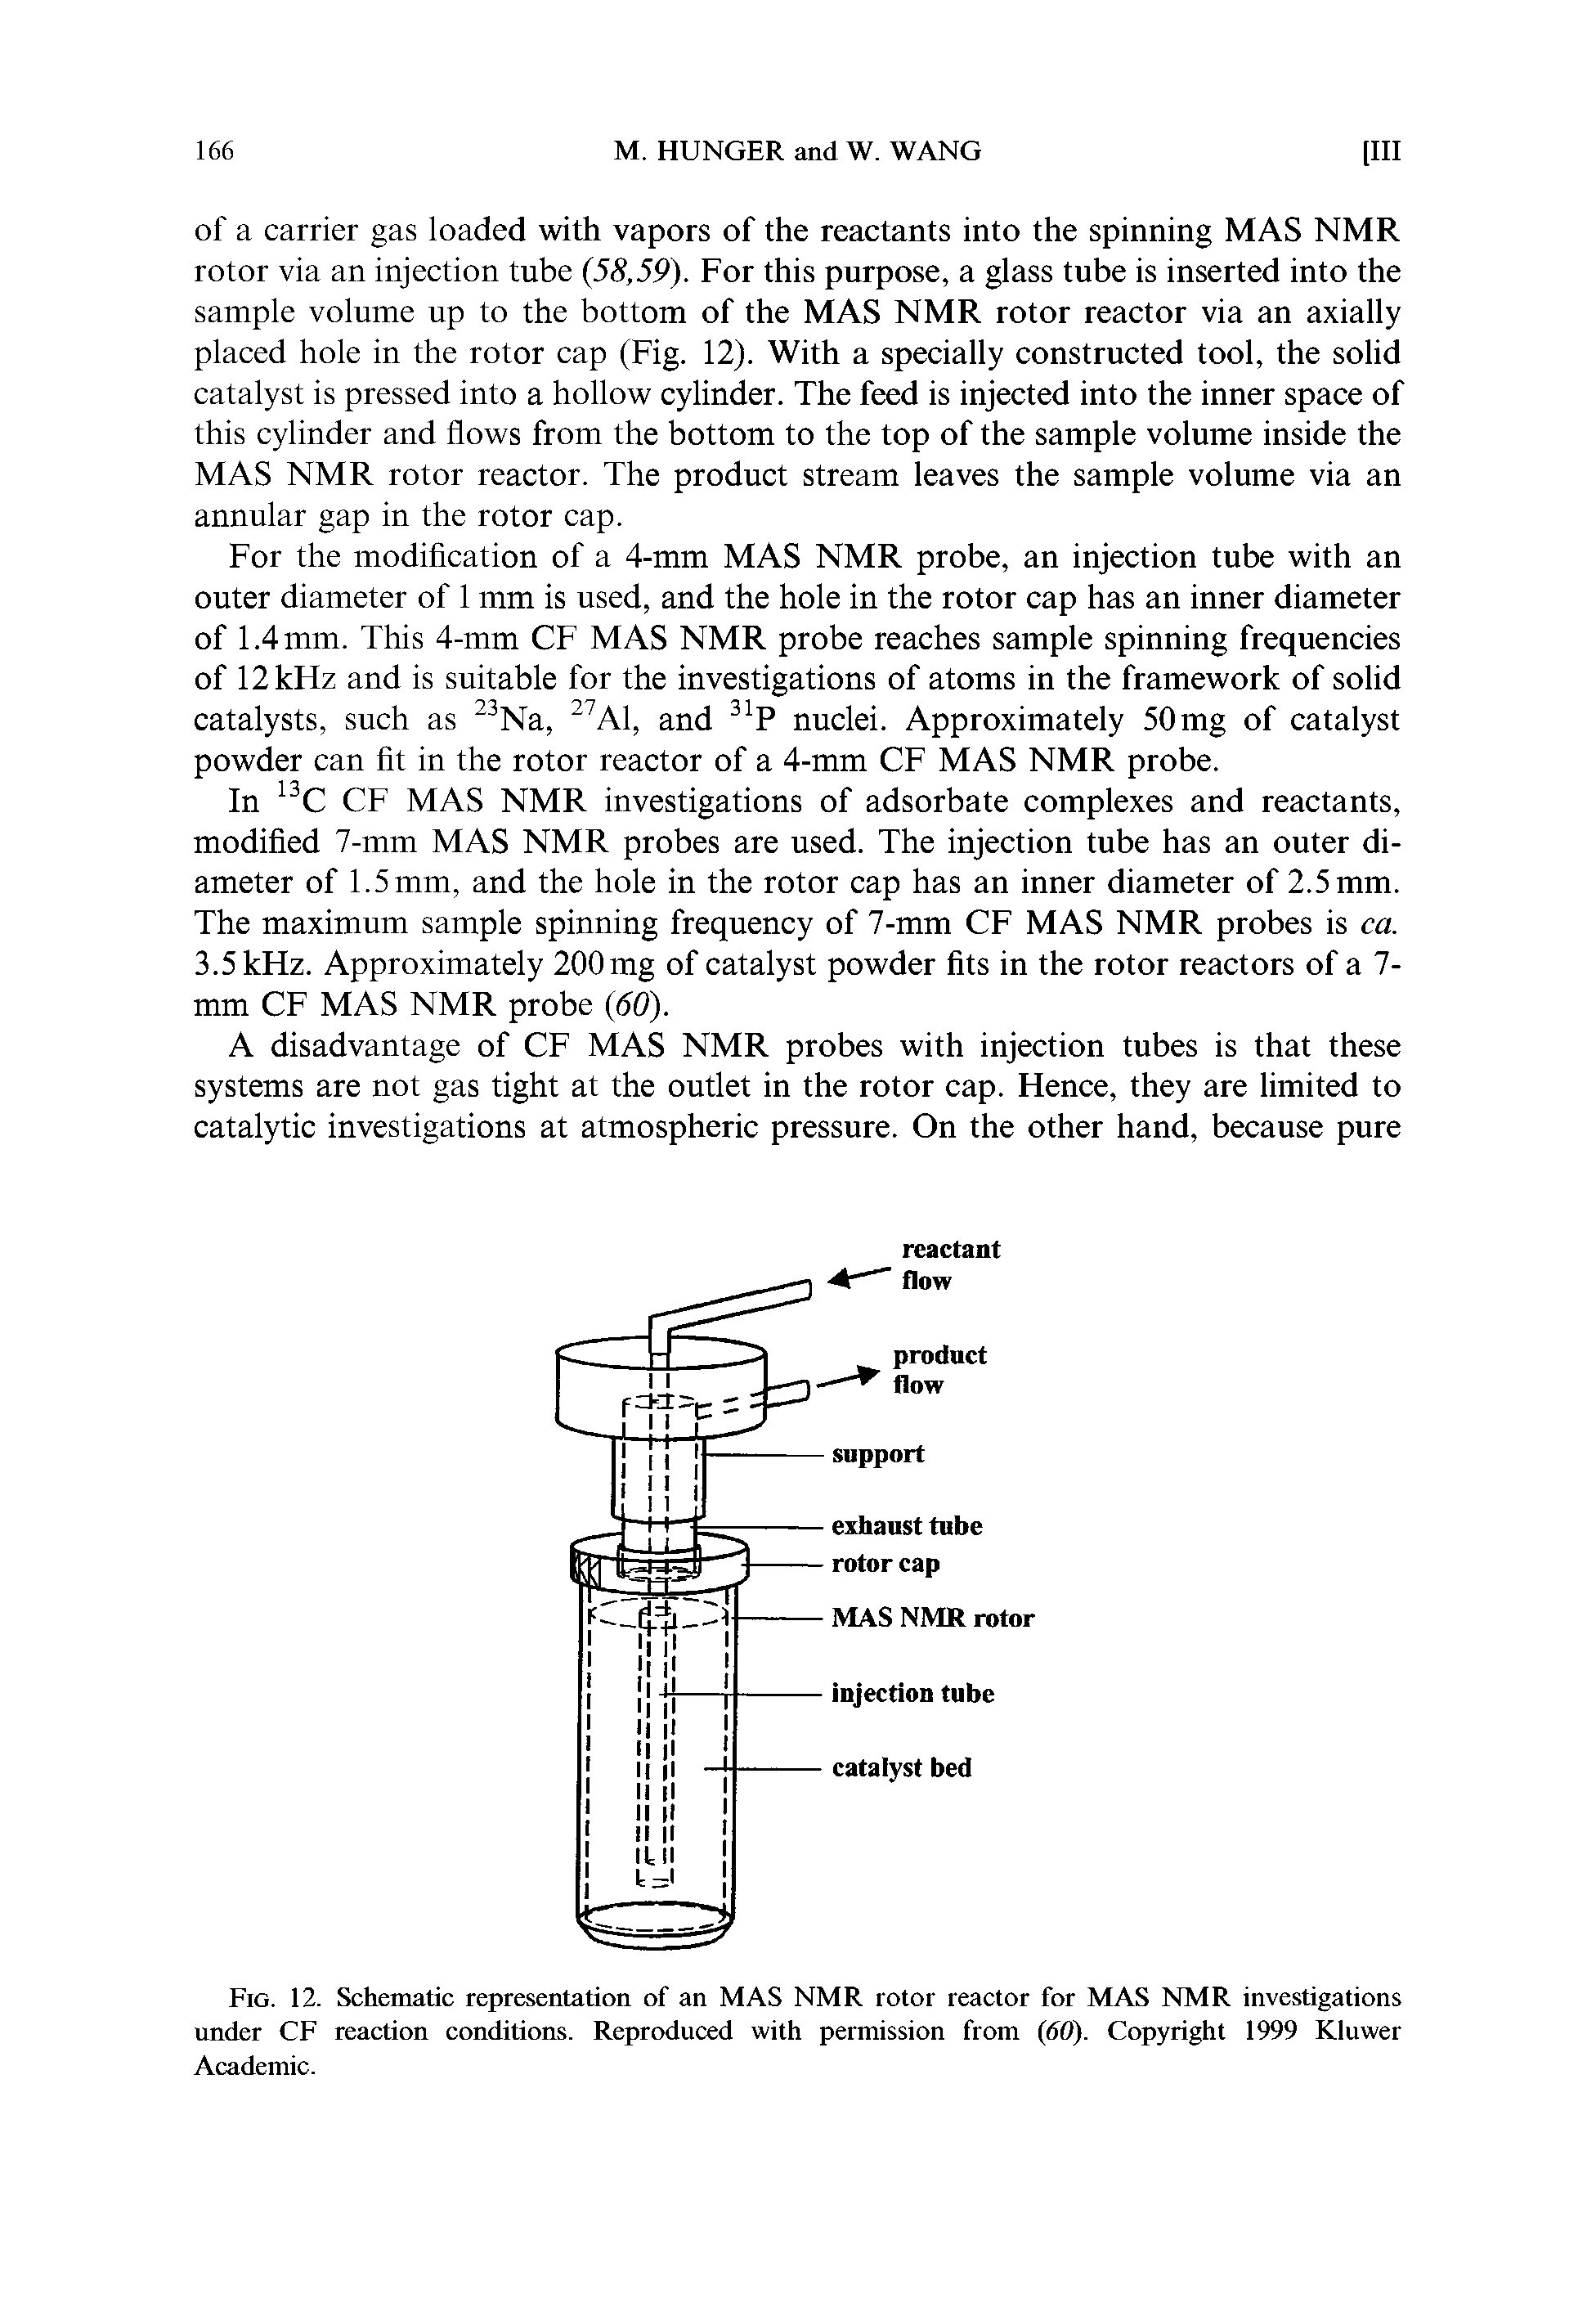 Fig. 12. Schematic representation of an MAS NMR rotor reactor for MAS NMR investigations under CF reaction conditions. Reproduced with permission from 60. Copyright 1999 Kluwer Academic.